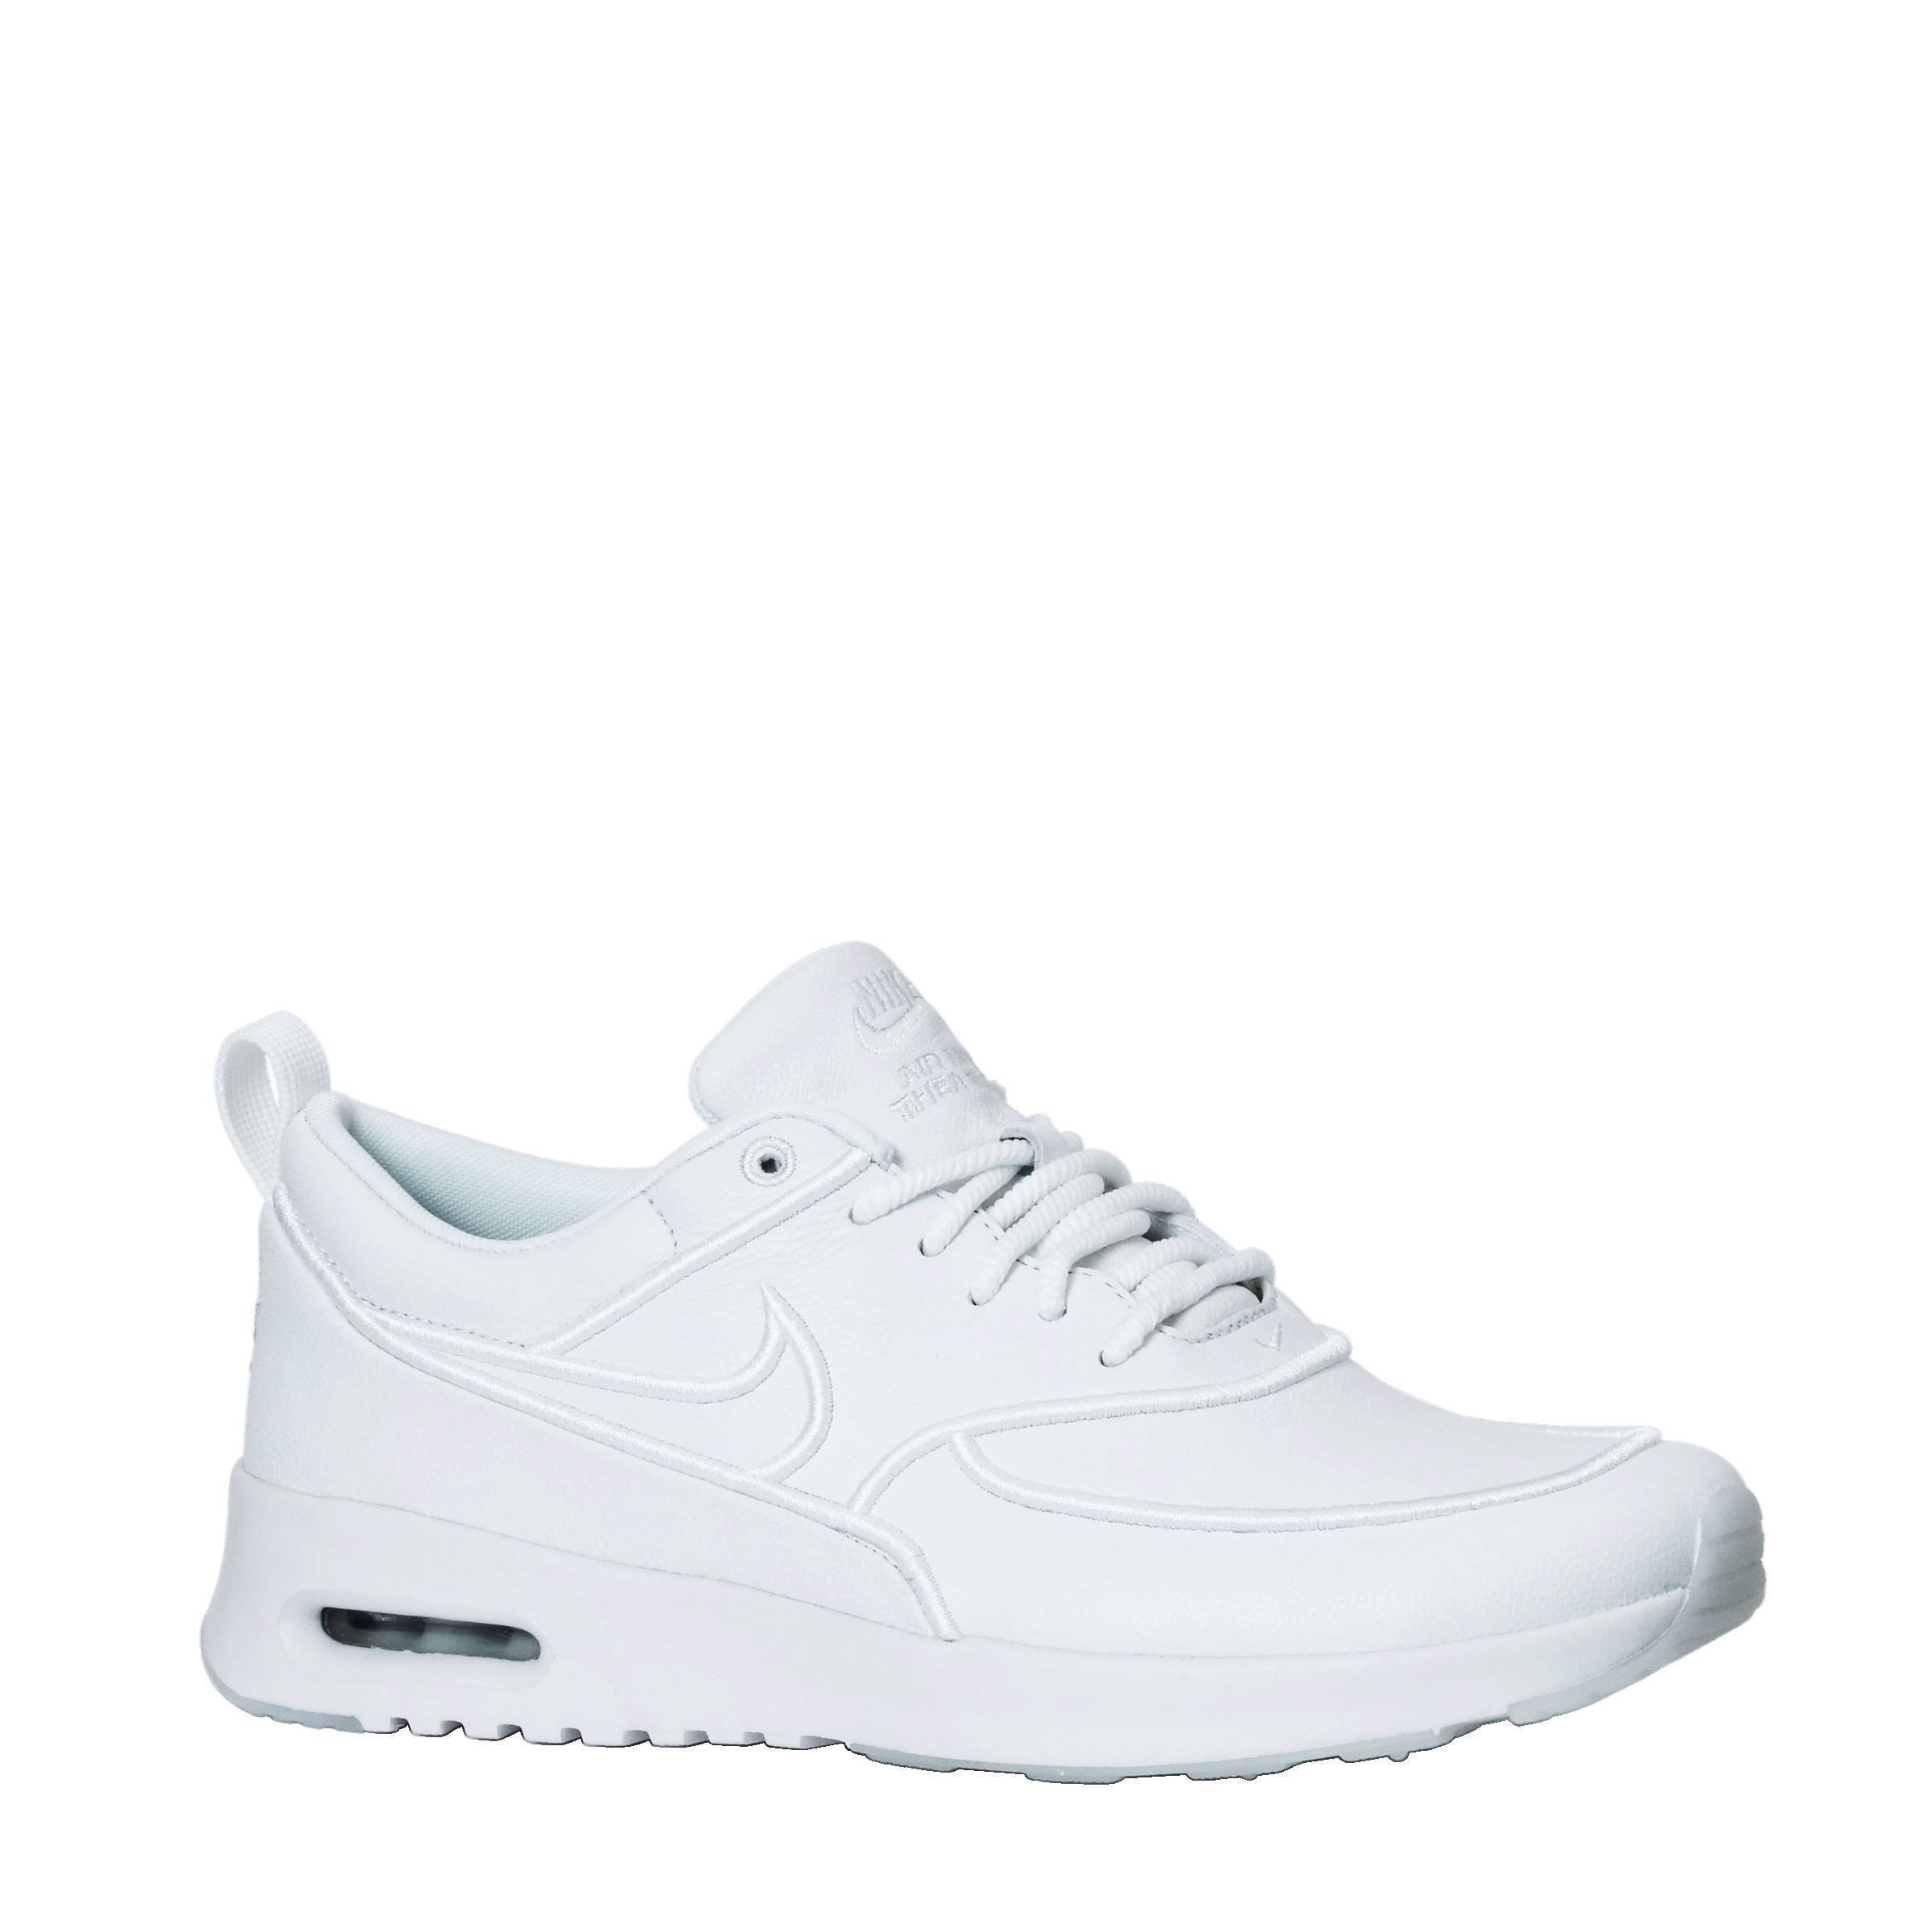 nike air max wit dames> OFF-72%